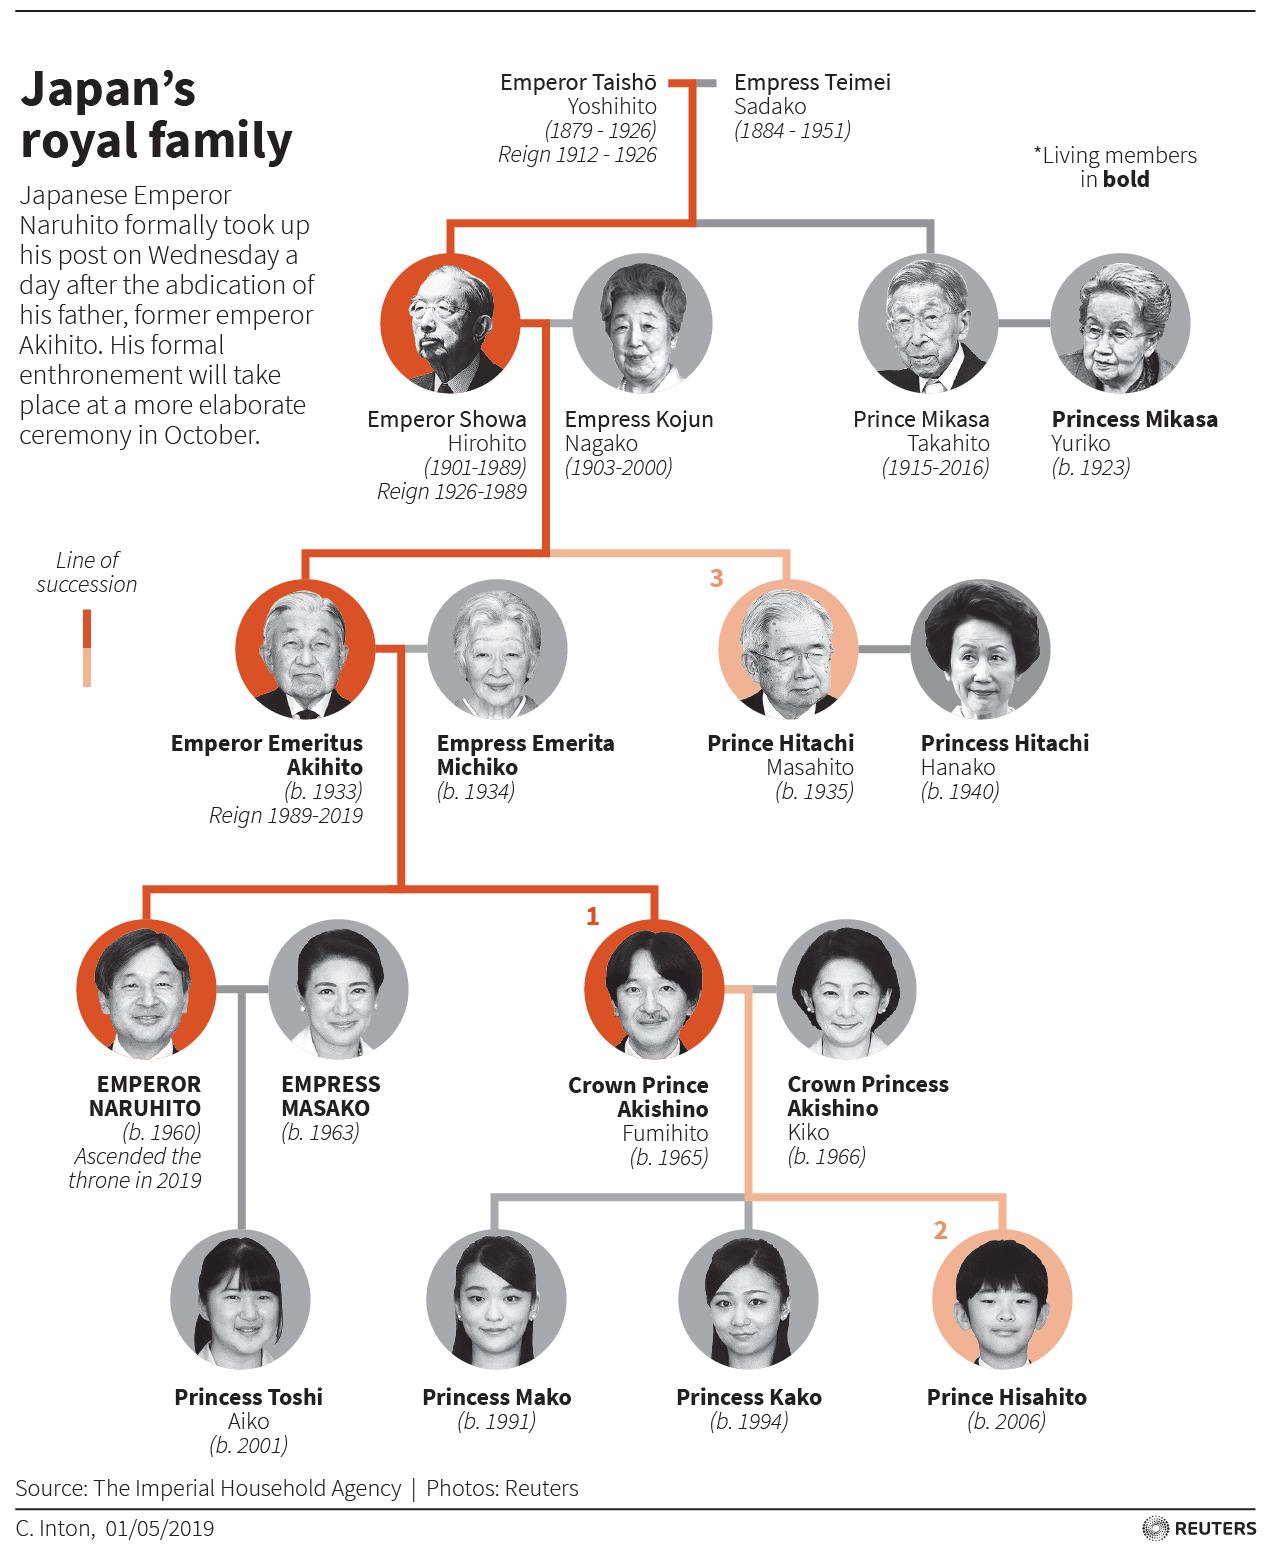 A family tree showing the Japanese royal family